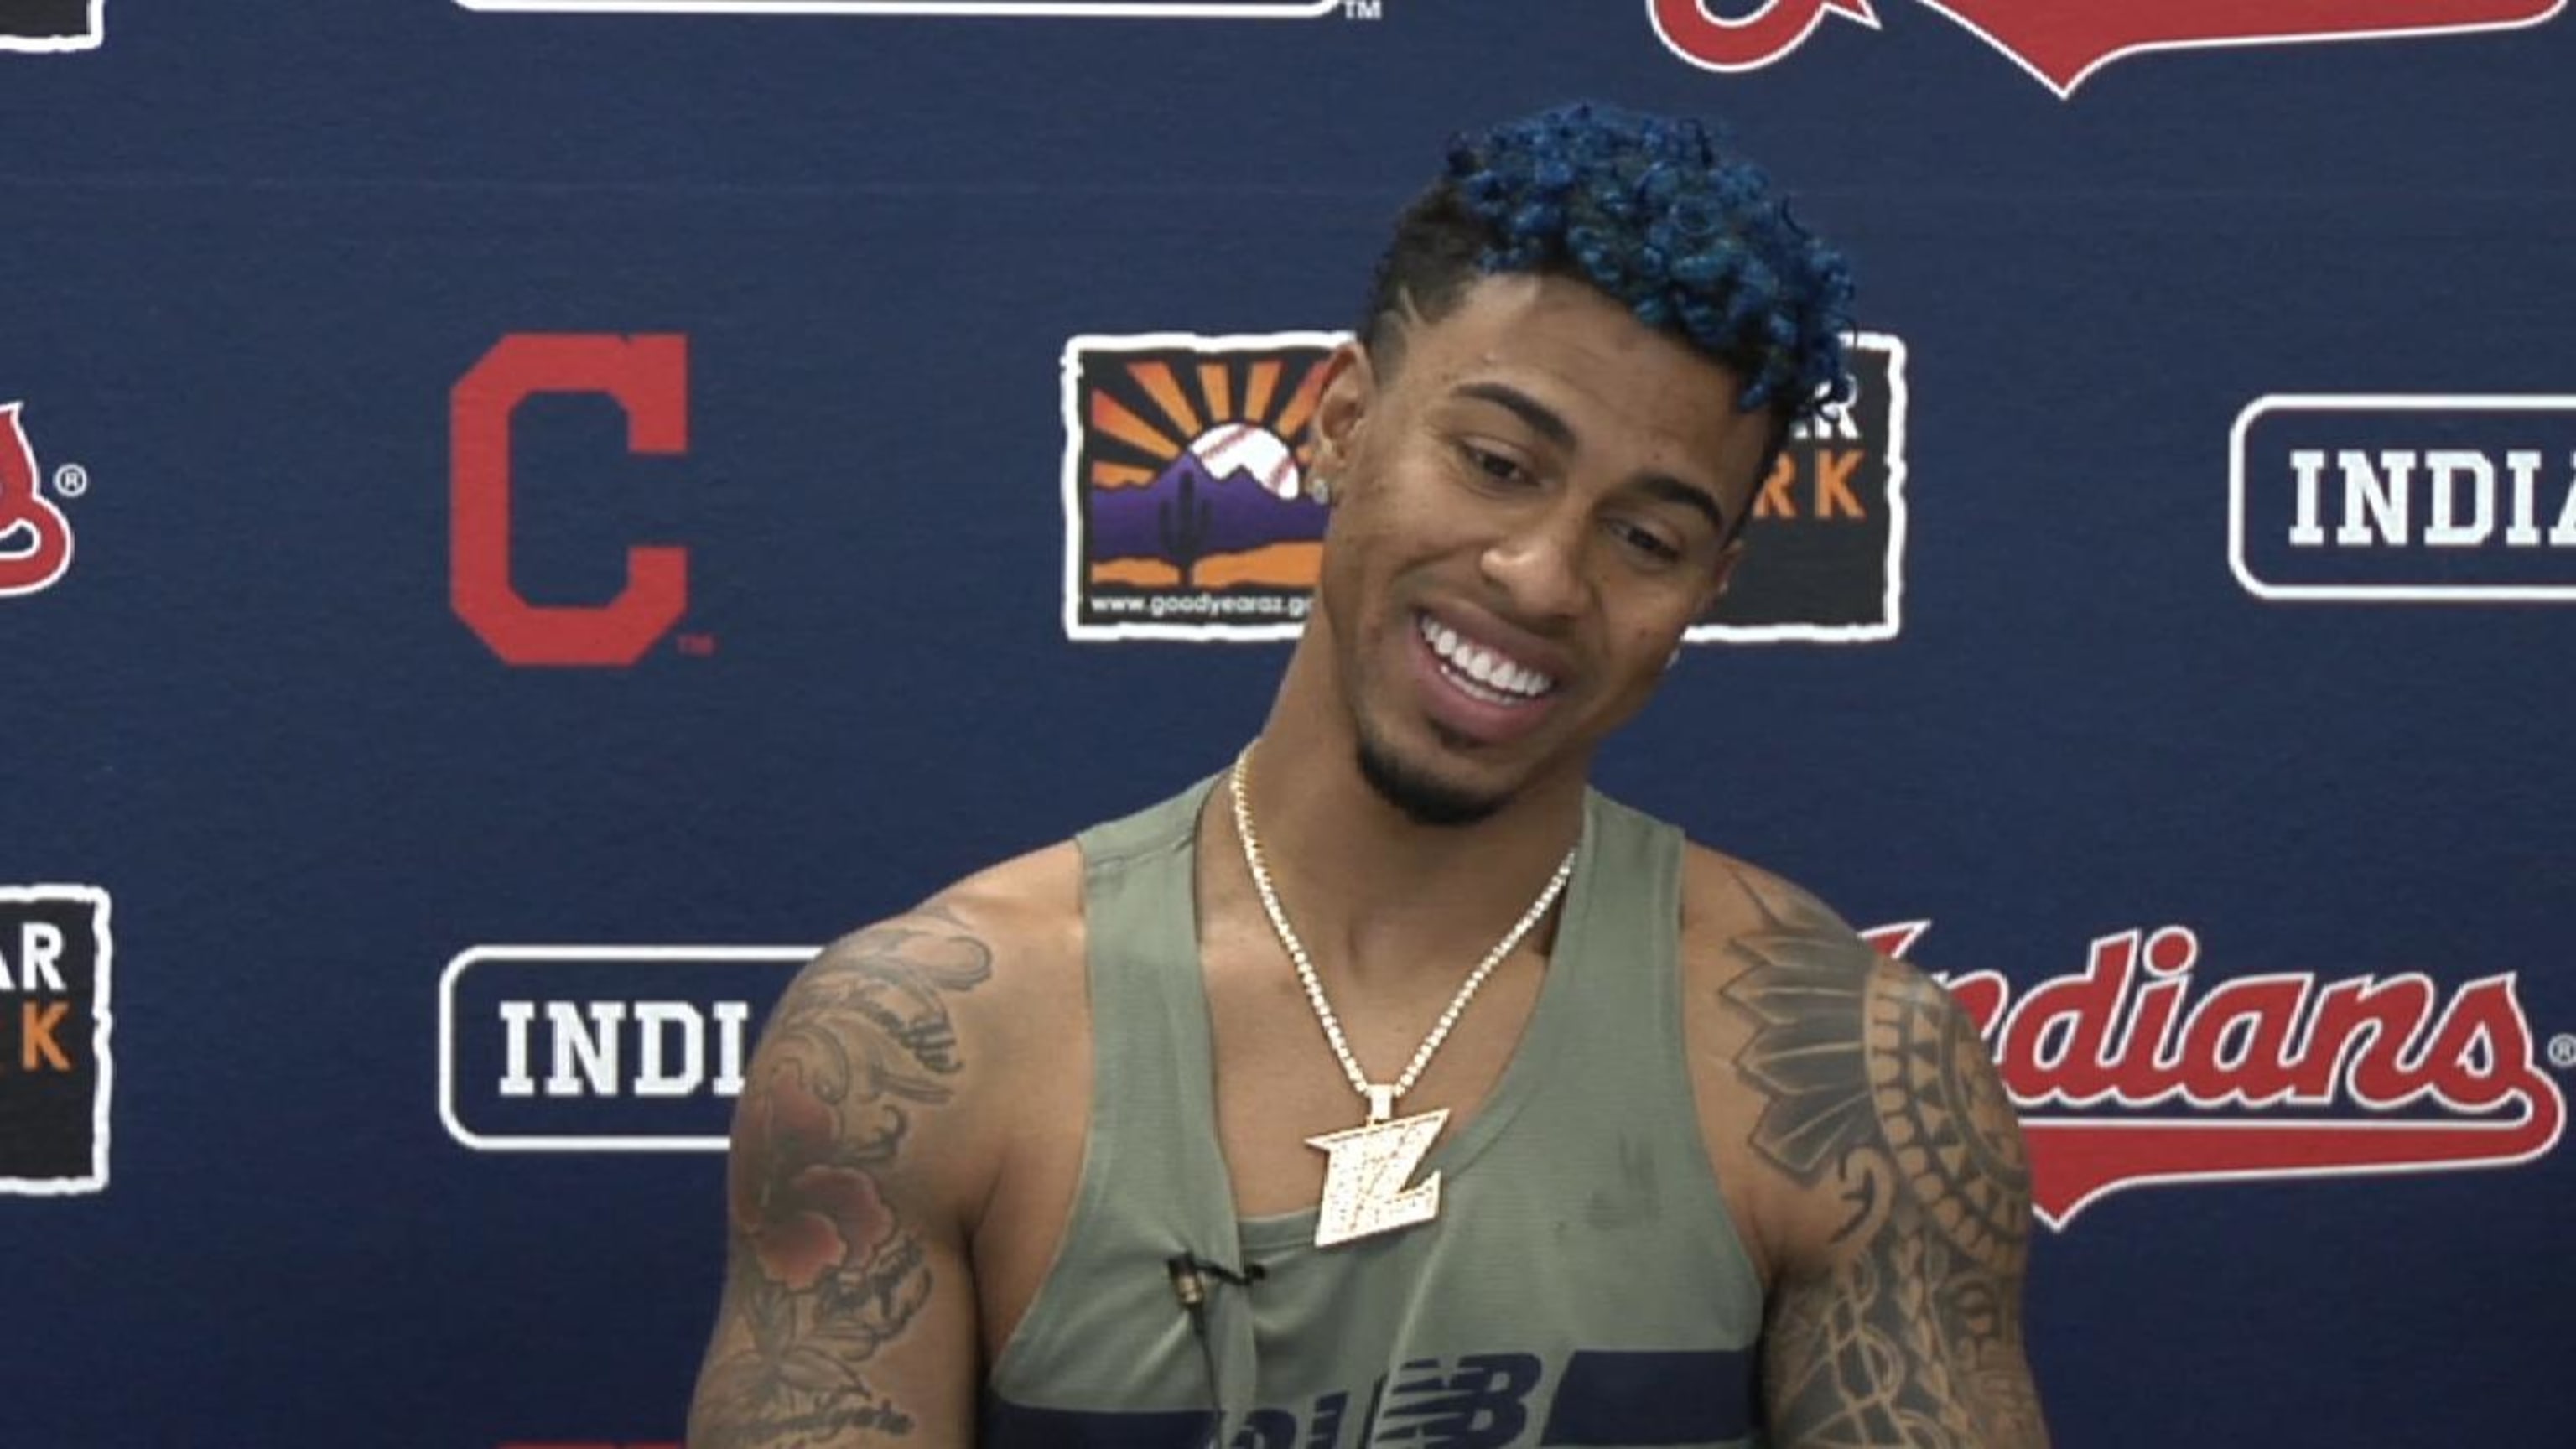 If you were wondering: Yes, Francisco Lindor's hair is still electric blue  and yes, it looks fantastic 